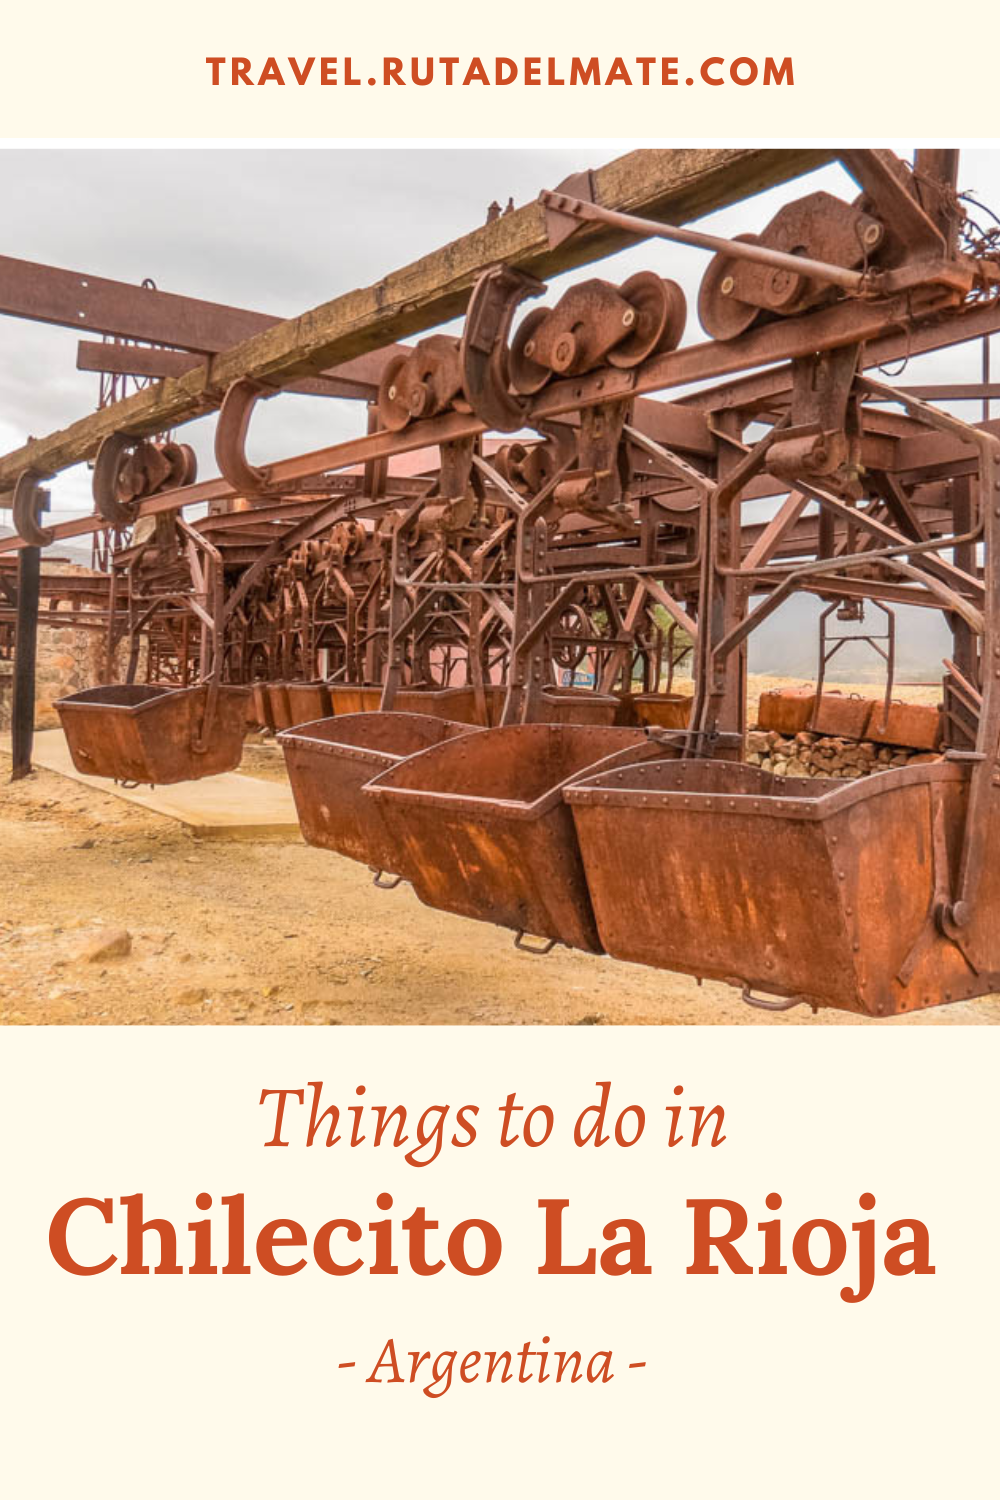 Things to do in Chilecito and Famatina in La Rioja